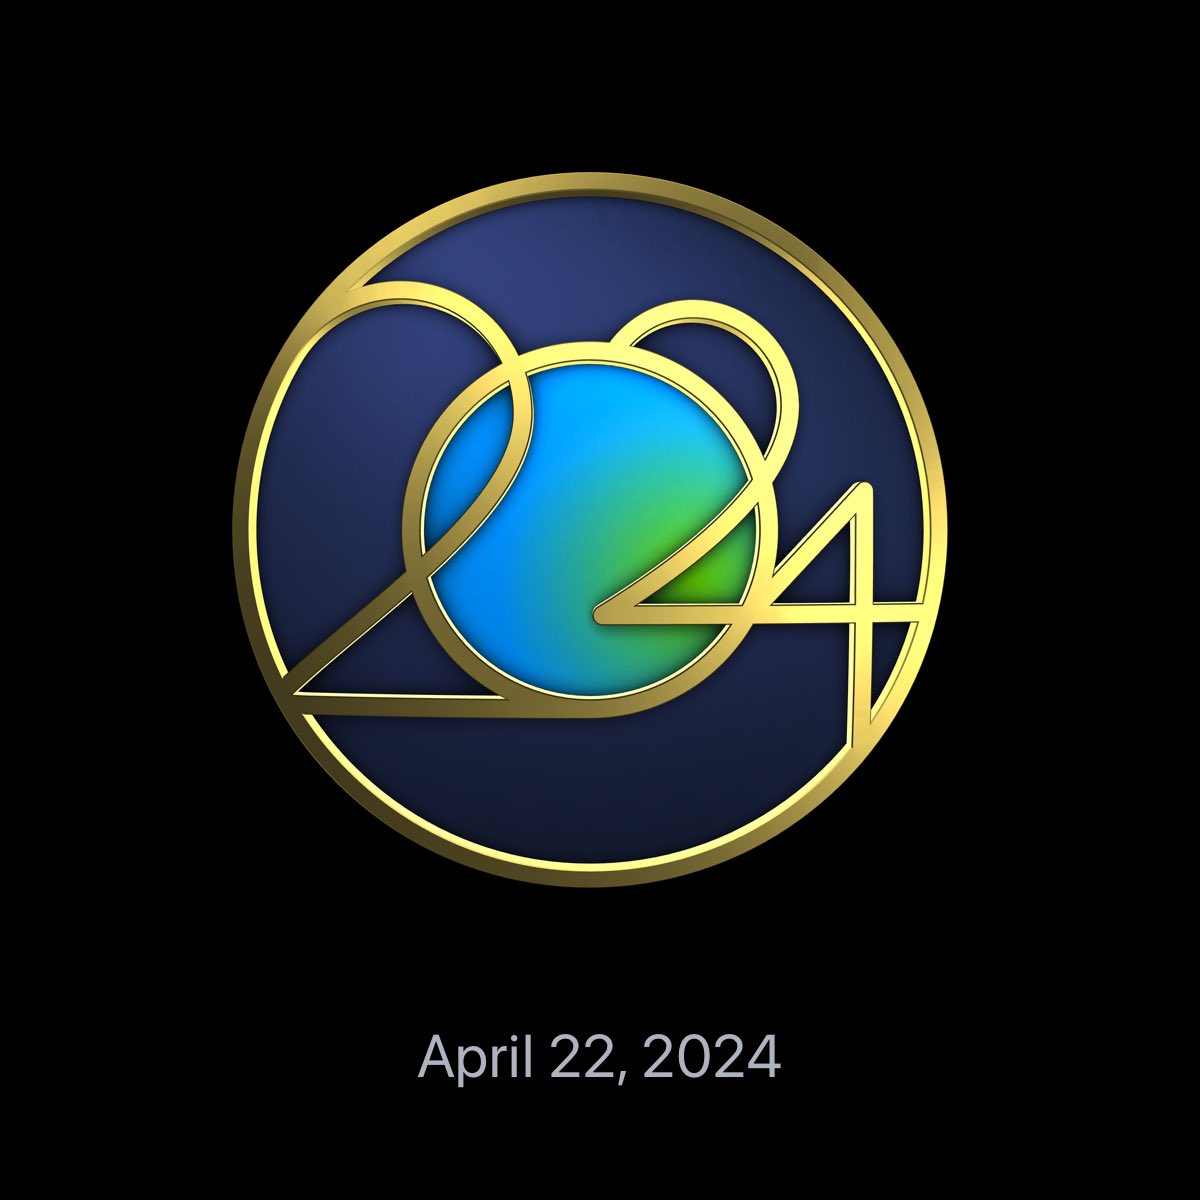 I earned this Earth Day award with a 30-minute workout on Earth Day.